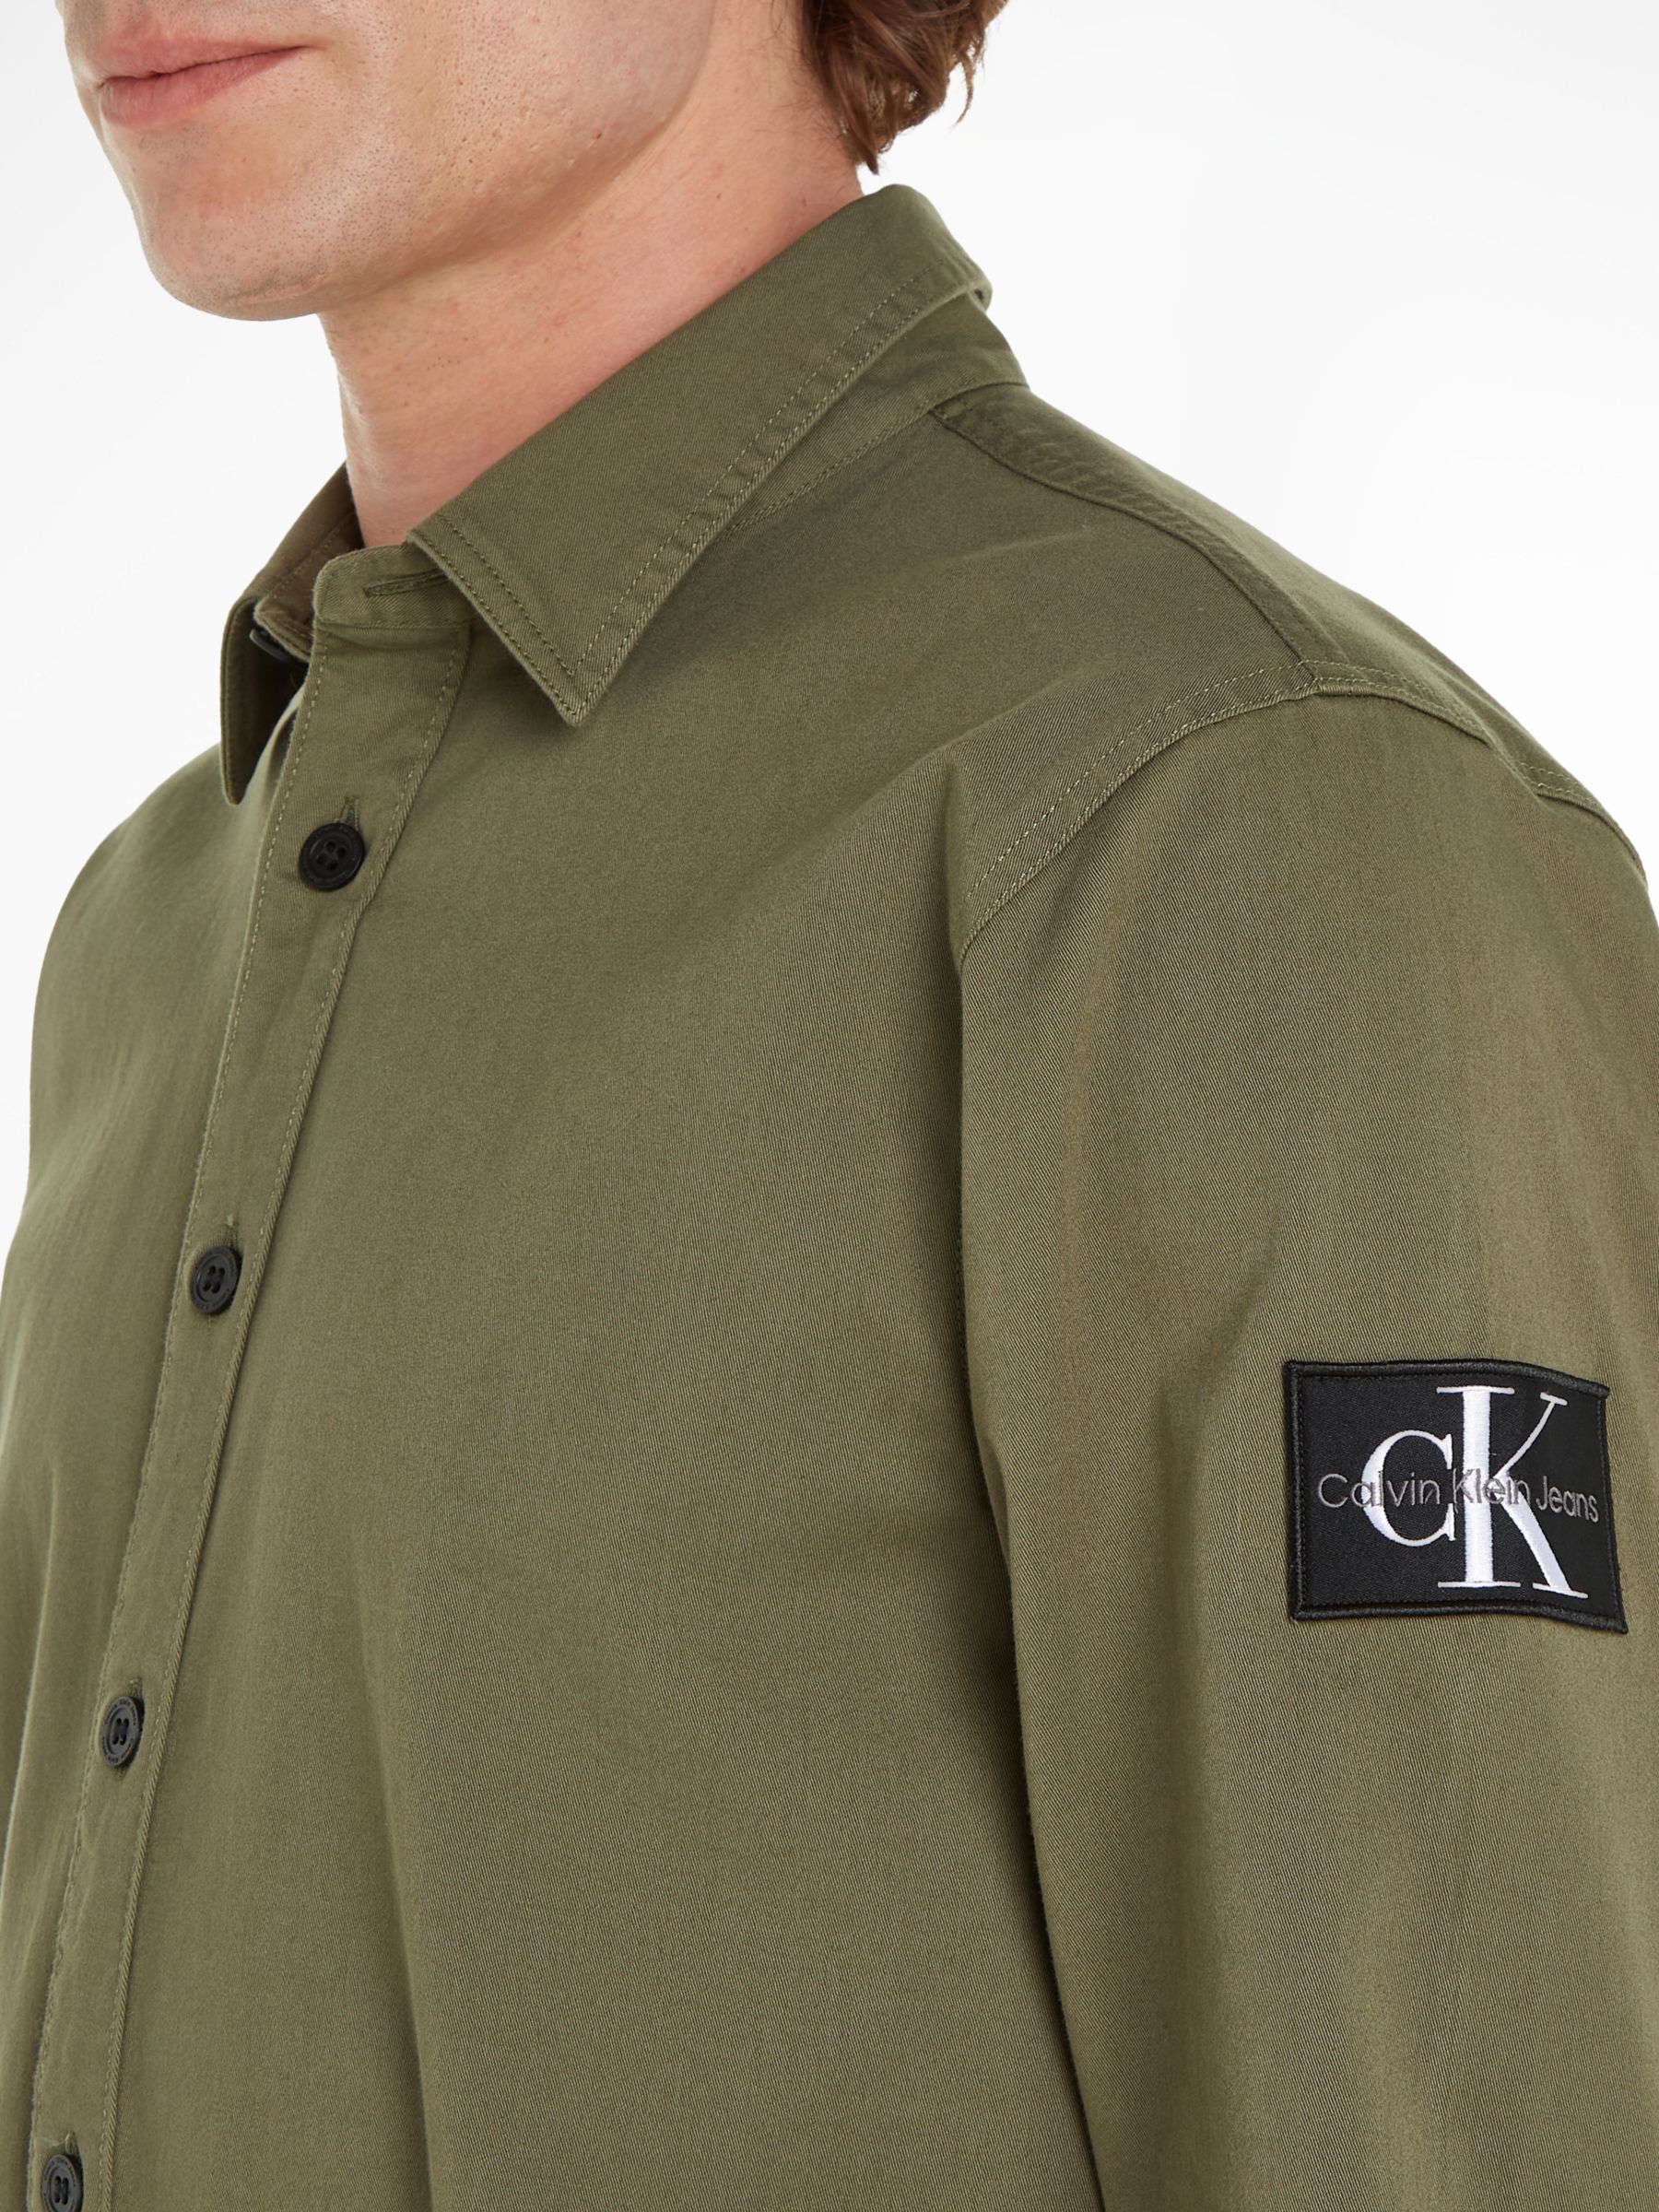 Calvin Klein Jeans Relaxed Monologo Shirt, Dusty Olive, L